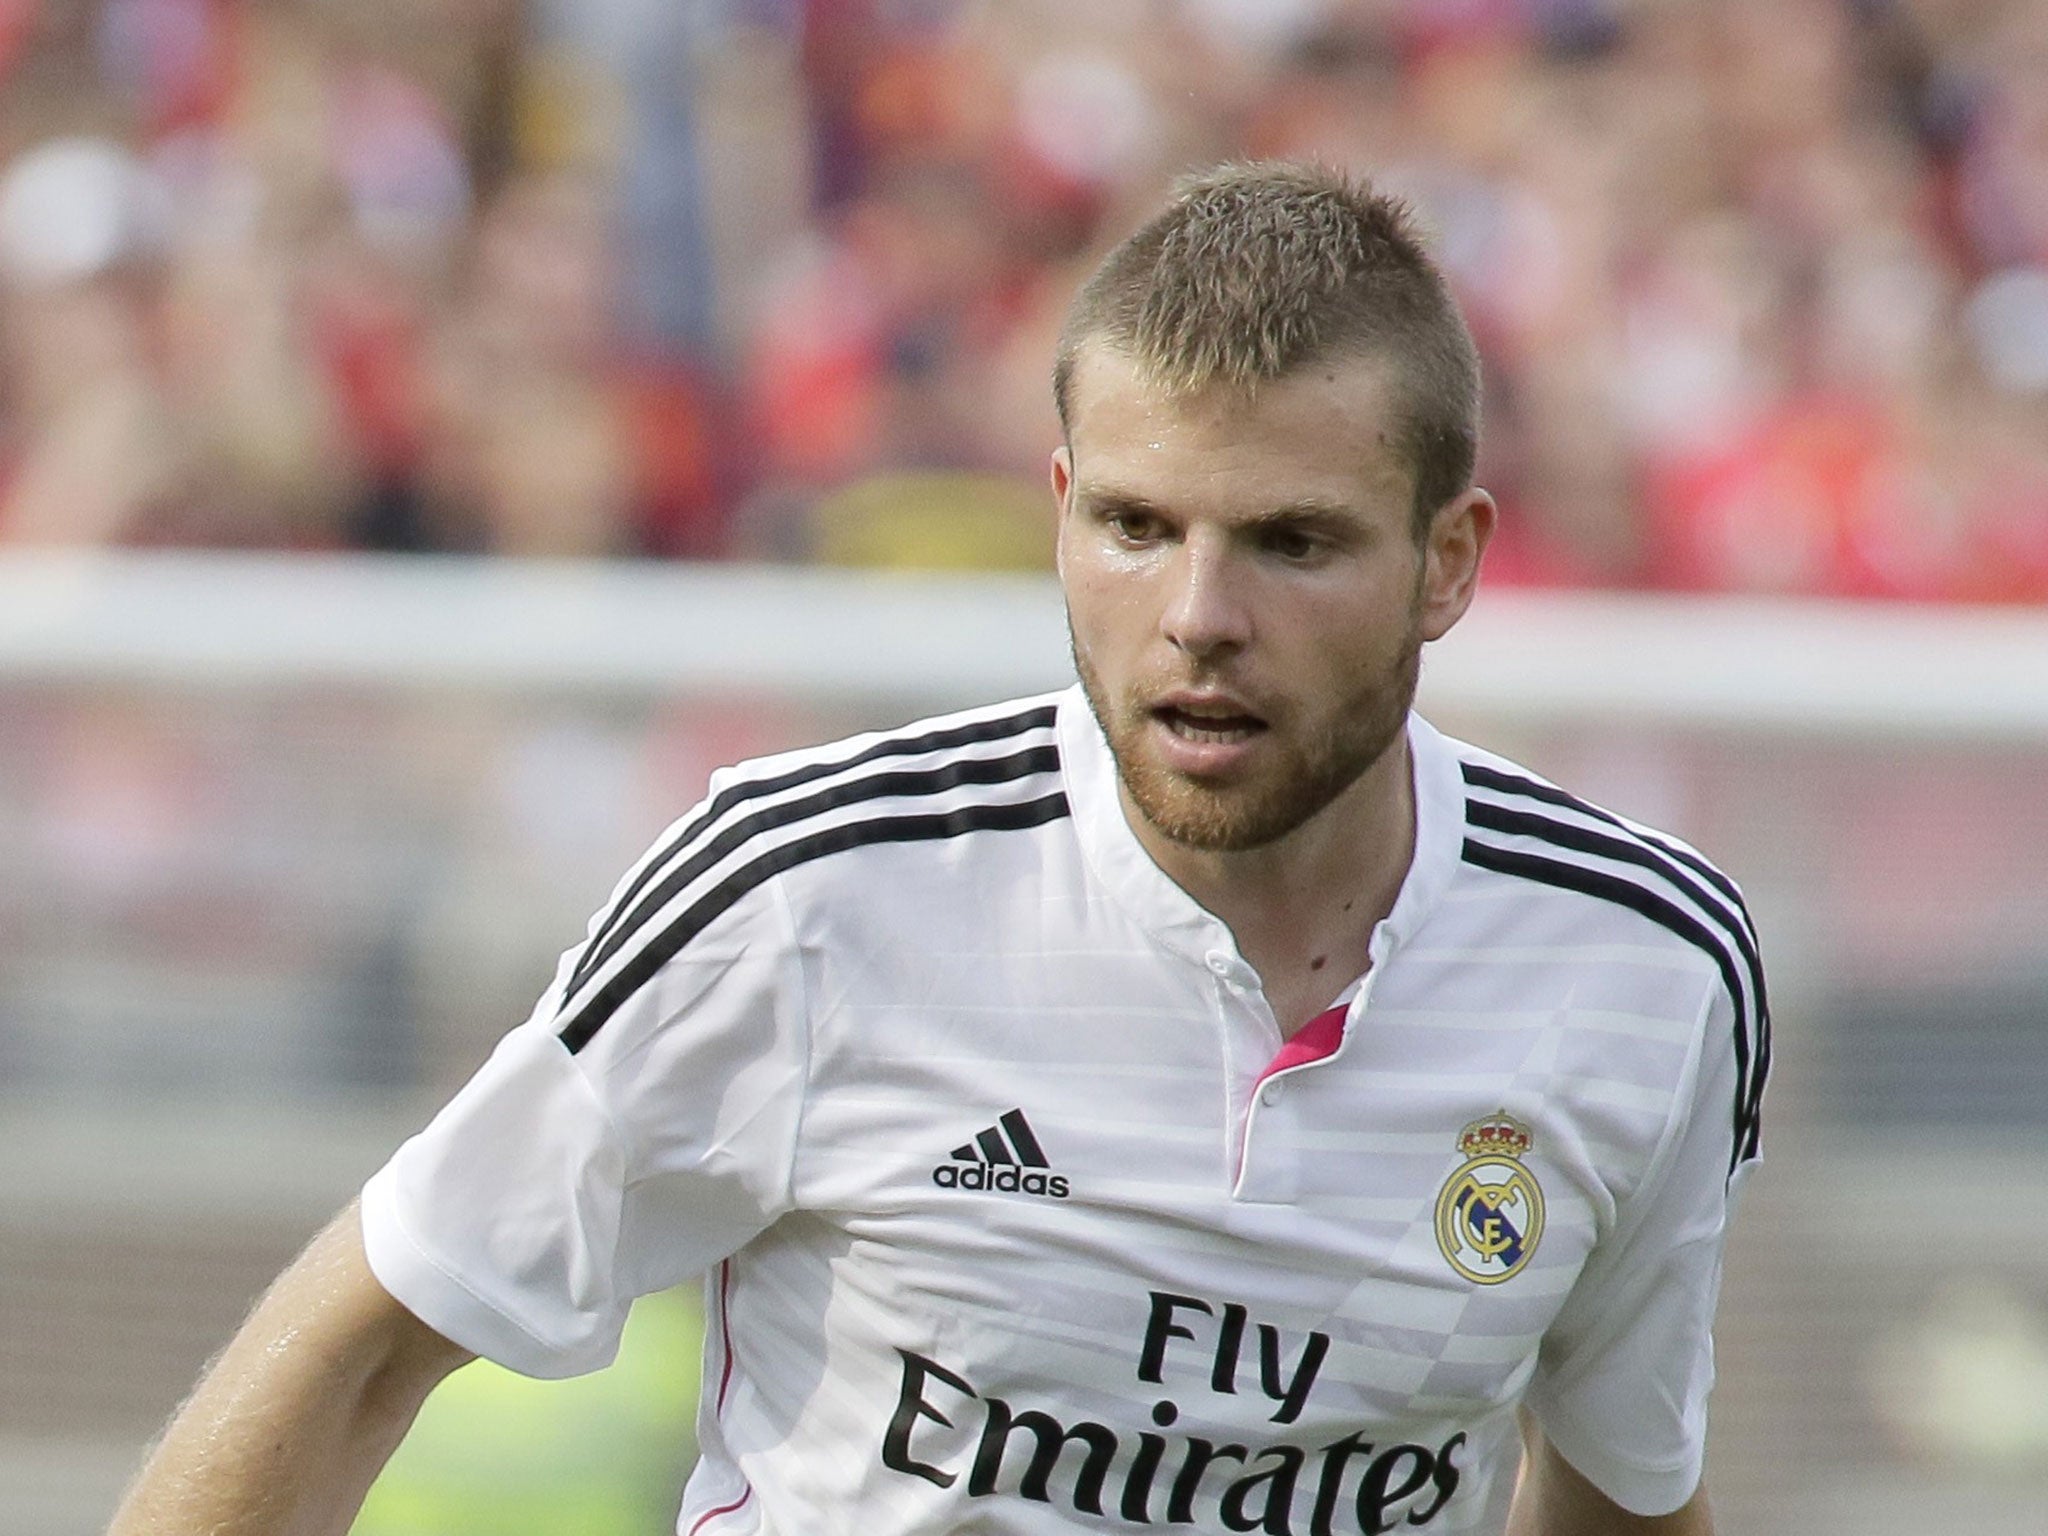 Asier Illarramendi made a cameo appearance for Real Madrid